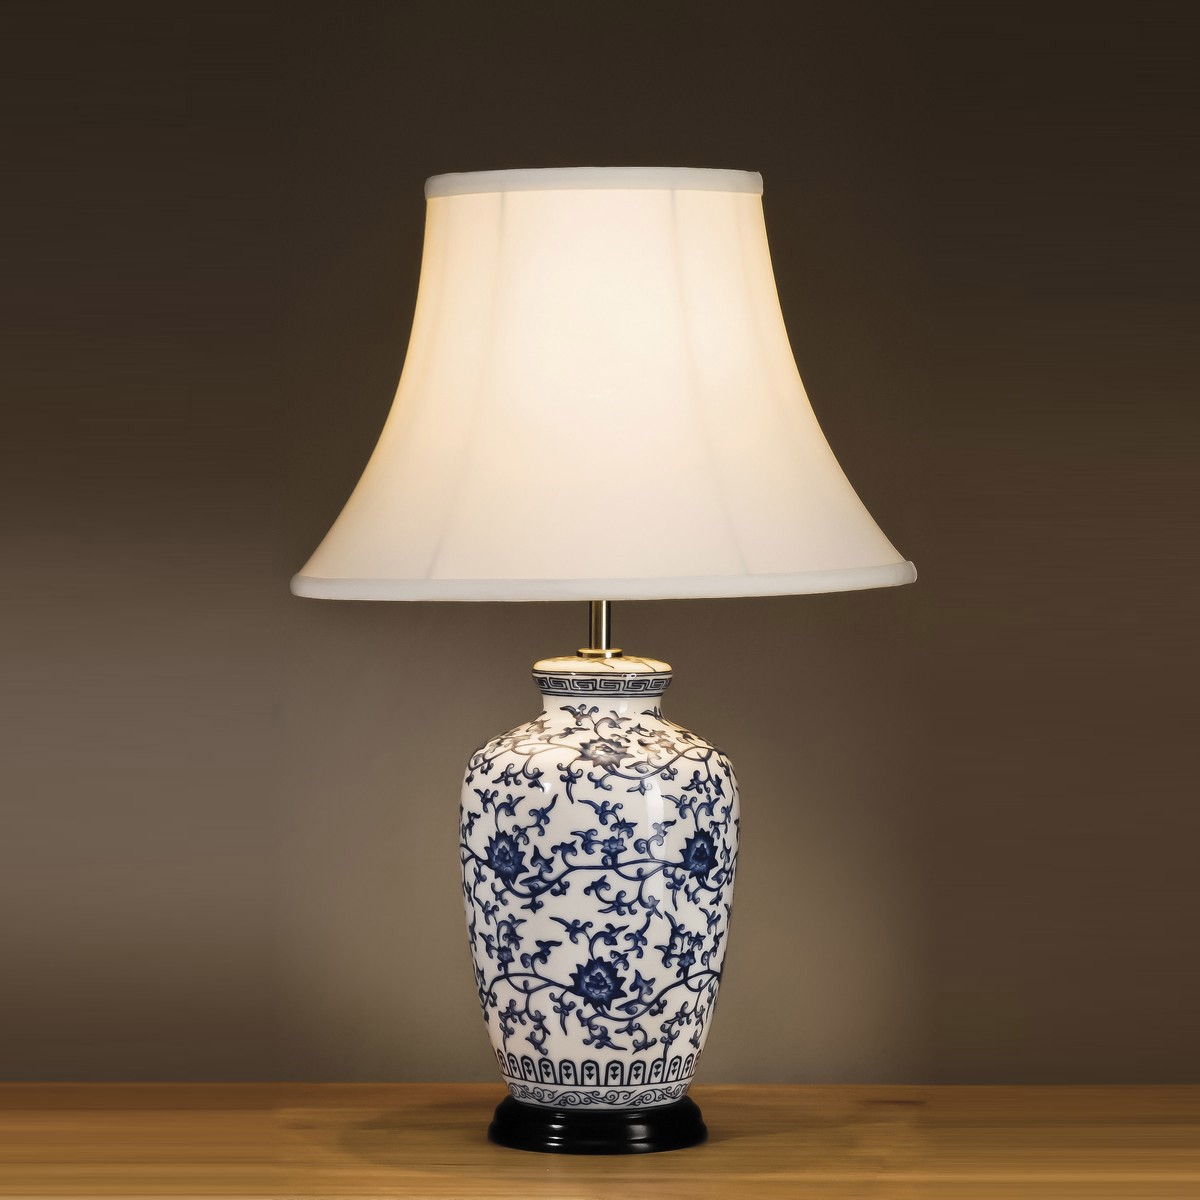 Table lamp collection ginger jar oriental blue and white ceramic